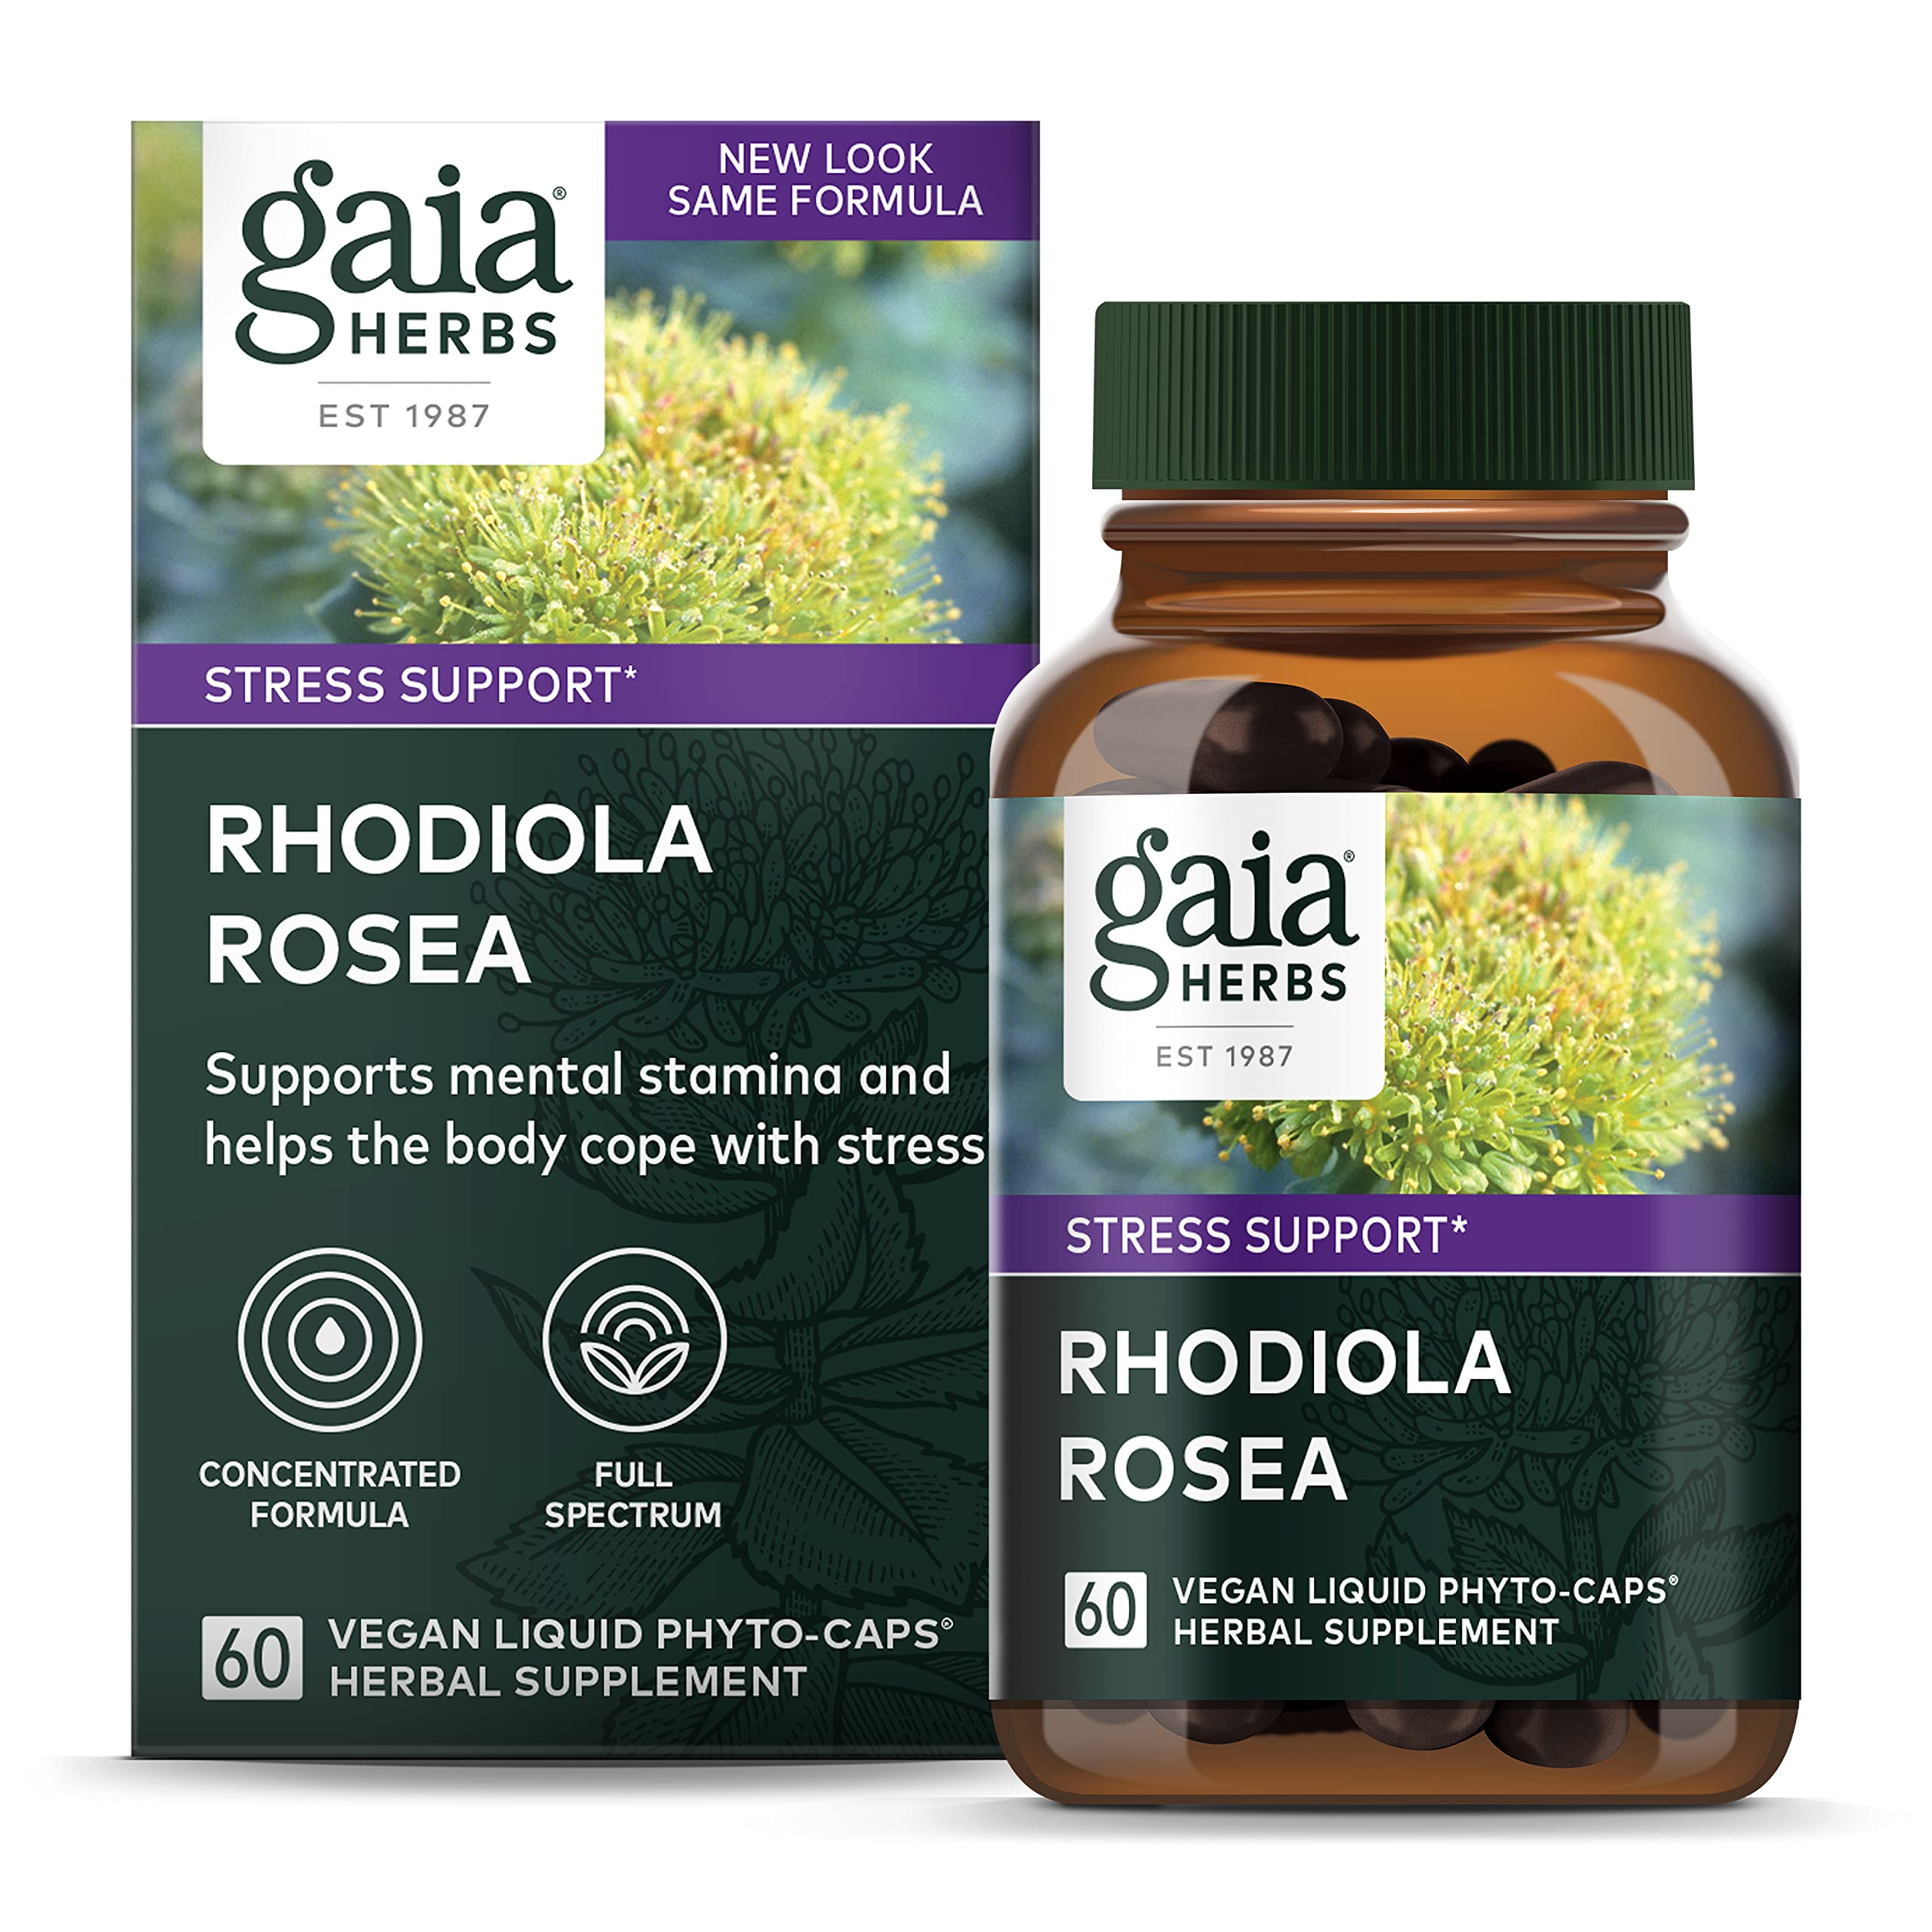 Gaia Herbs Rhodiola Rosea - Stress Support Supplement Traditionally for Supporting Healthy Stamina and Endurance - with Siberian Rhodiola Root Extract - 60 Vegan Liquid Phyto-Capsules (30-Day Supply)